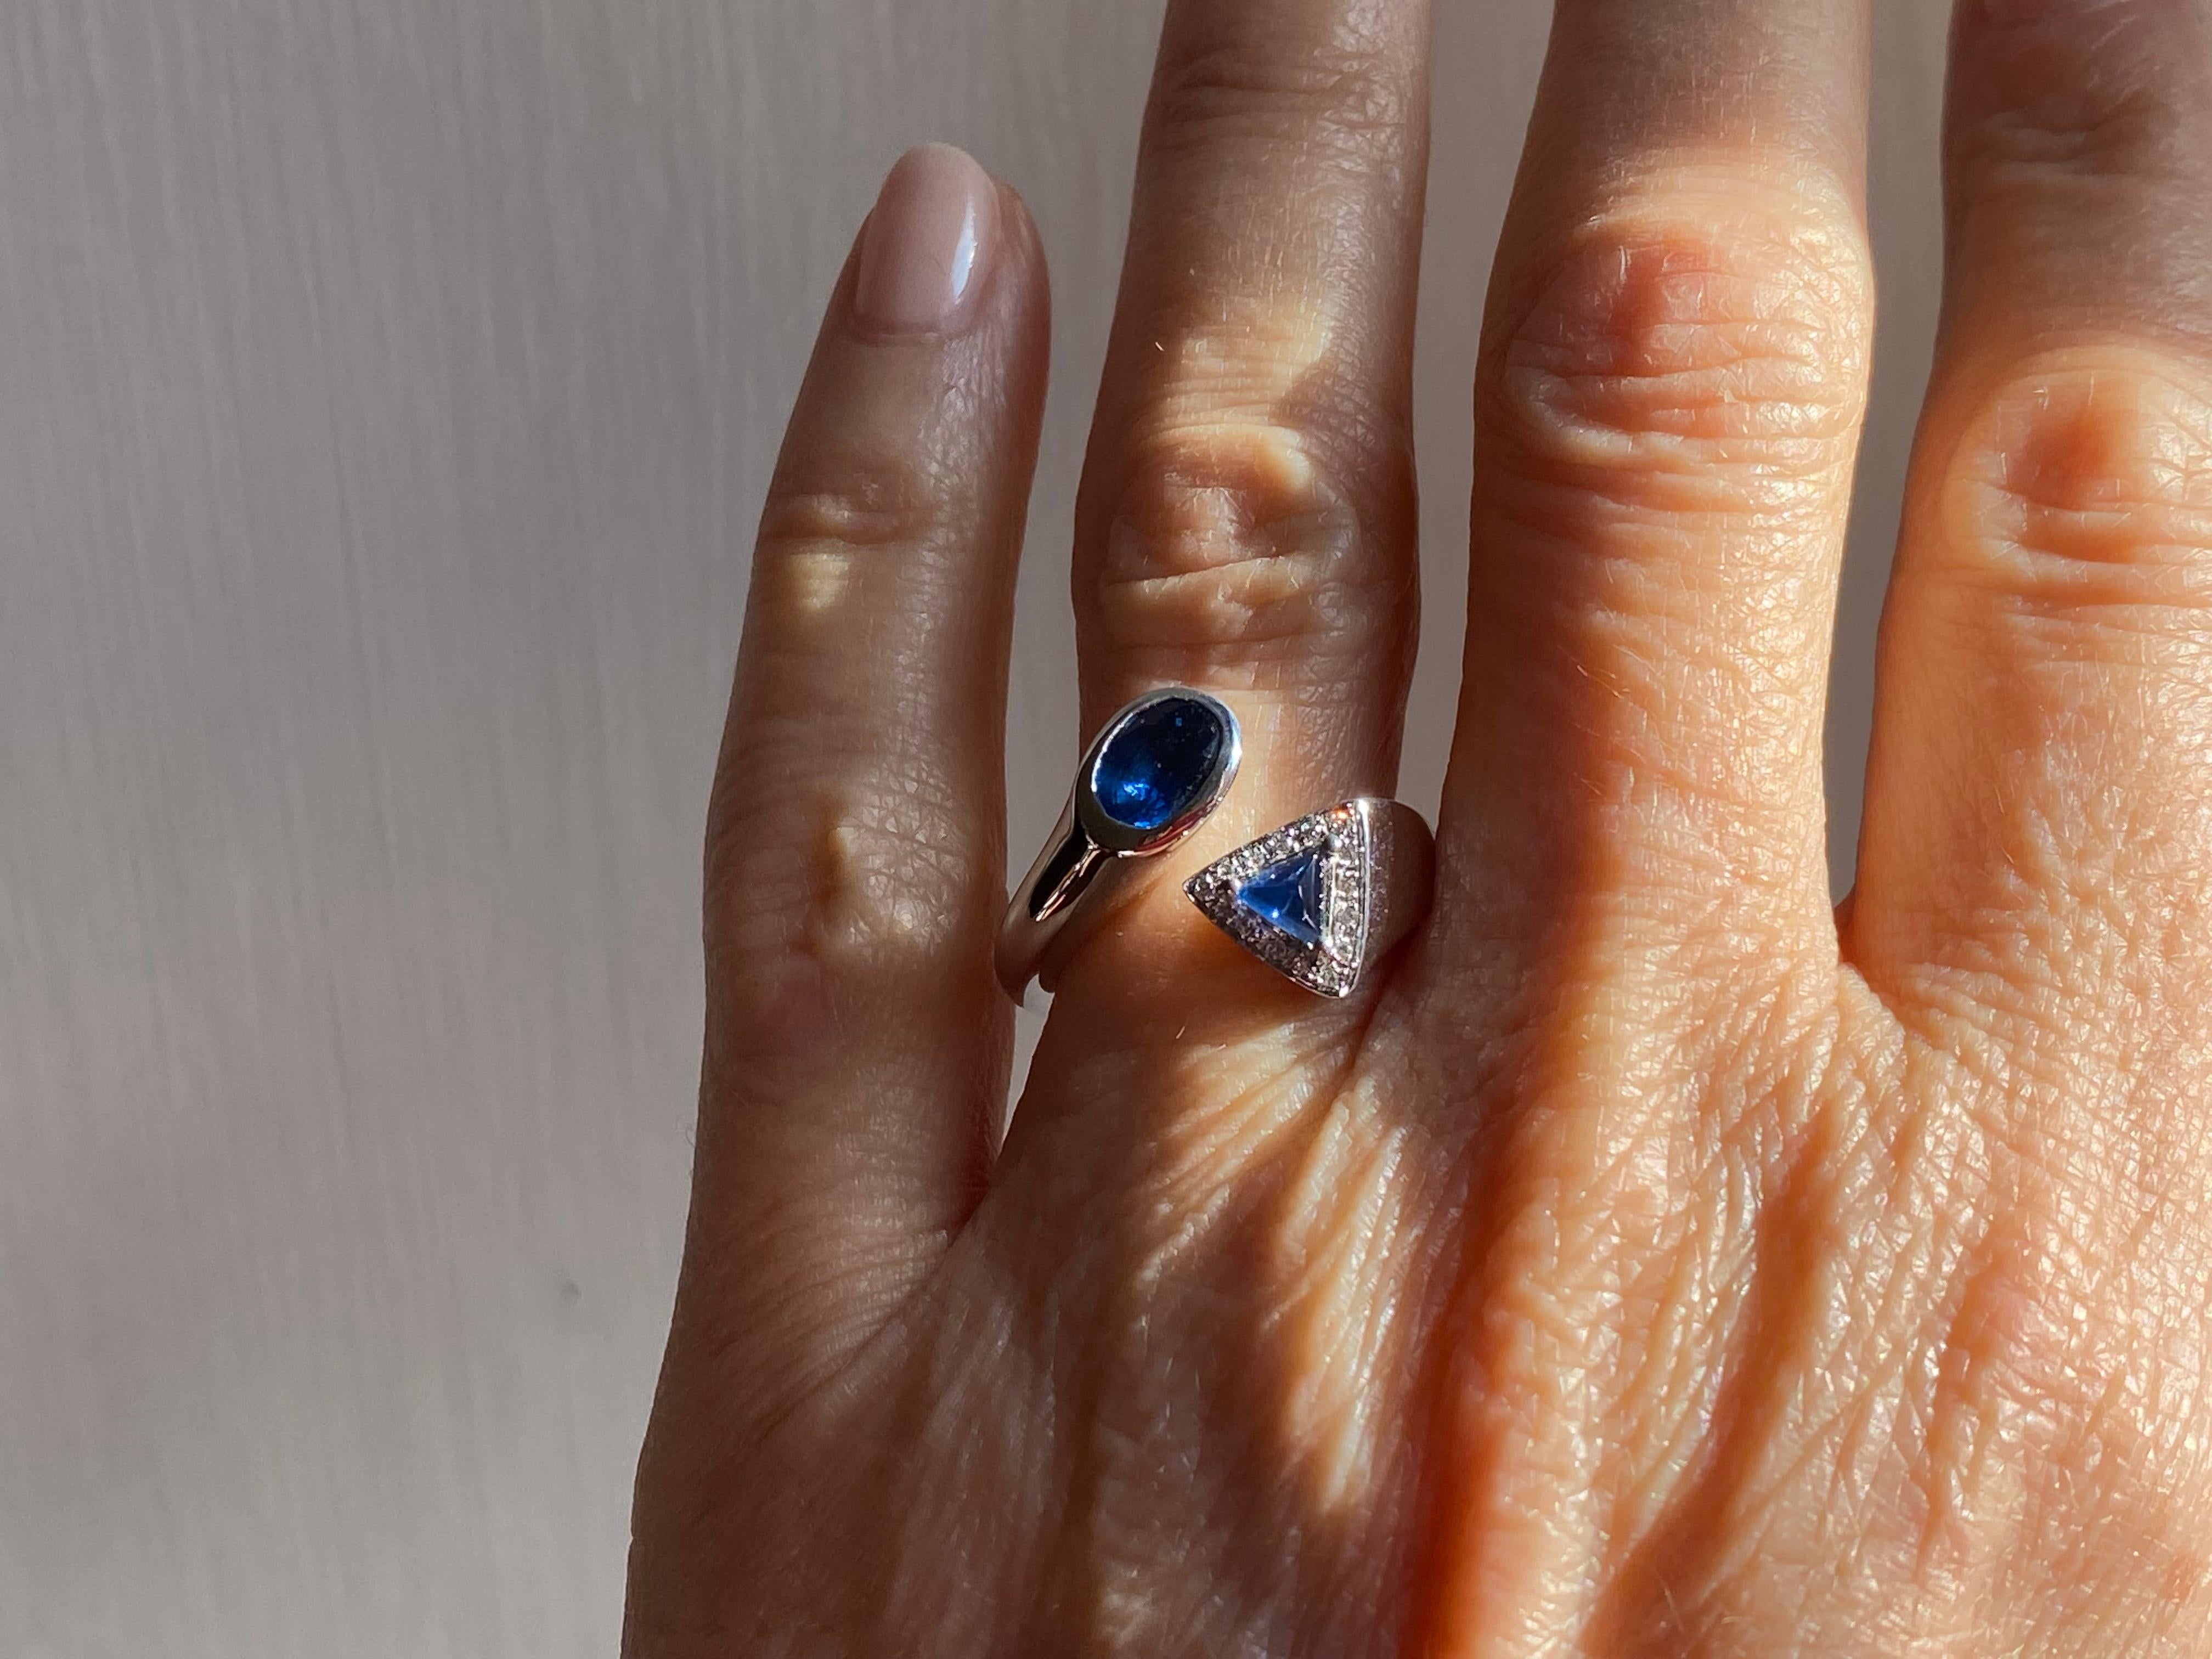 Rossella Ugolini Design Collection, Modern and Elegant 18 K White Gold 1.20 karats Sapphire 0.075 White Diamonds Design Ring
A beautiful sapphire design ring handcrafted in 18 karats white gold and embellished with brilliant-cut white diamonds and a